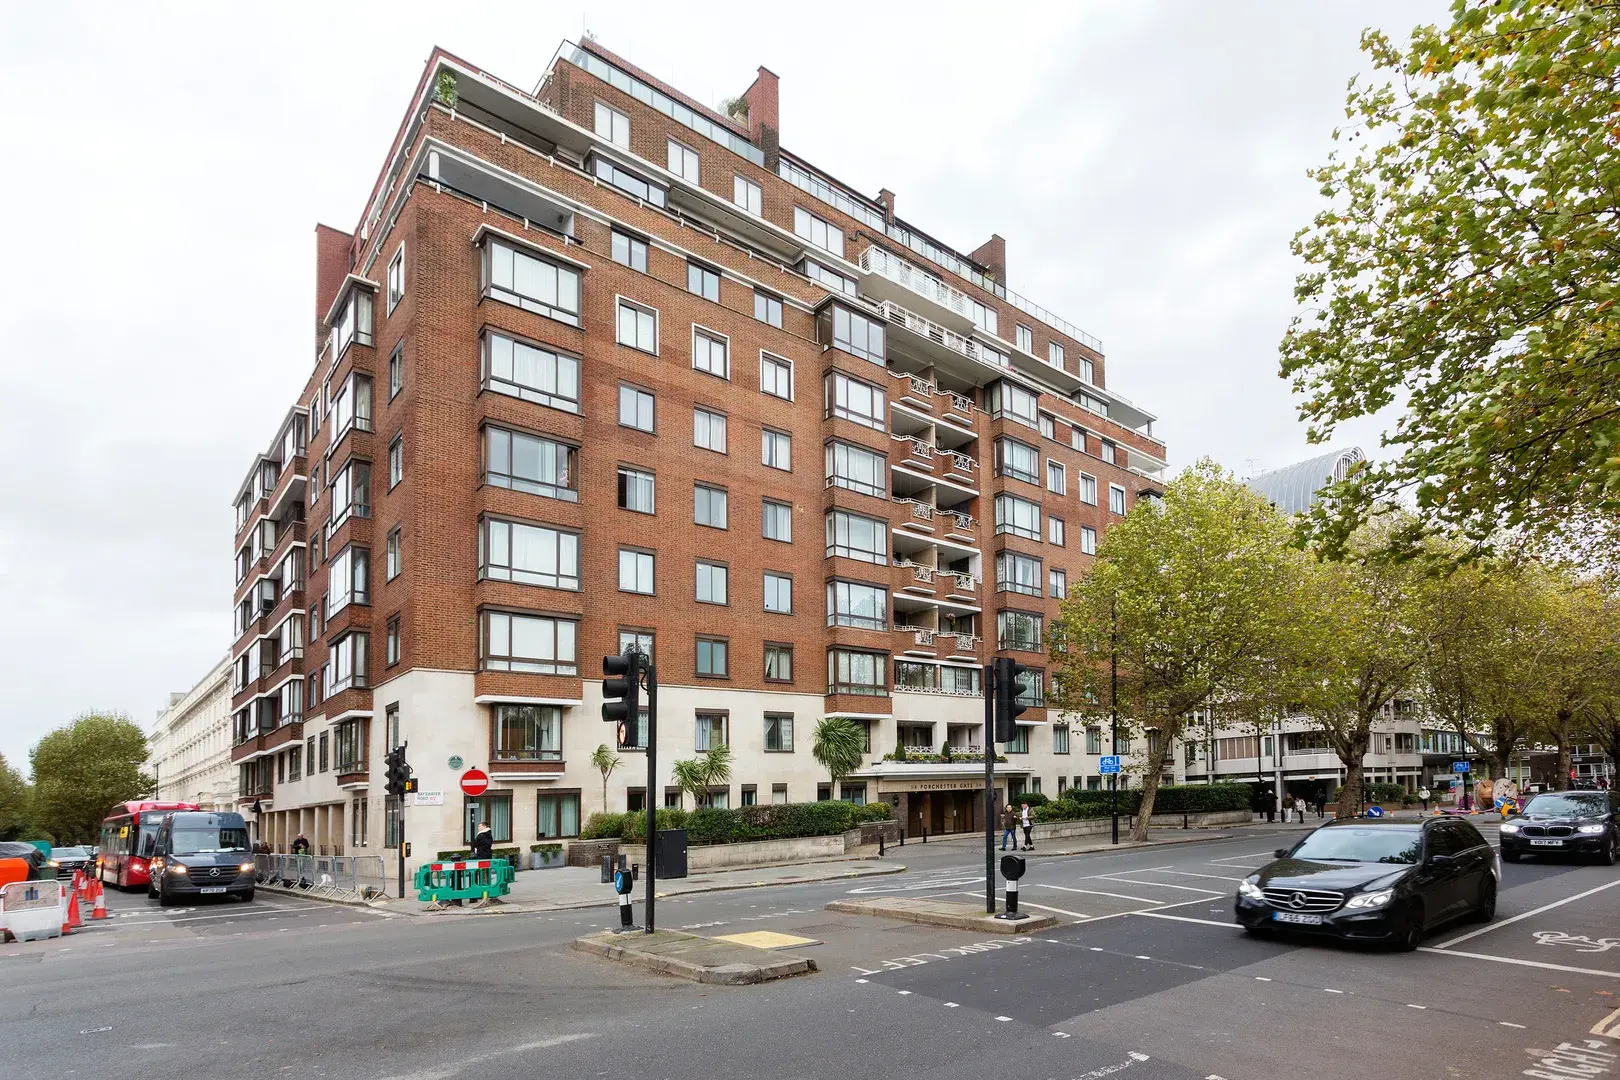 Bayswater Road, holiday home in Bayswater, London